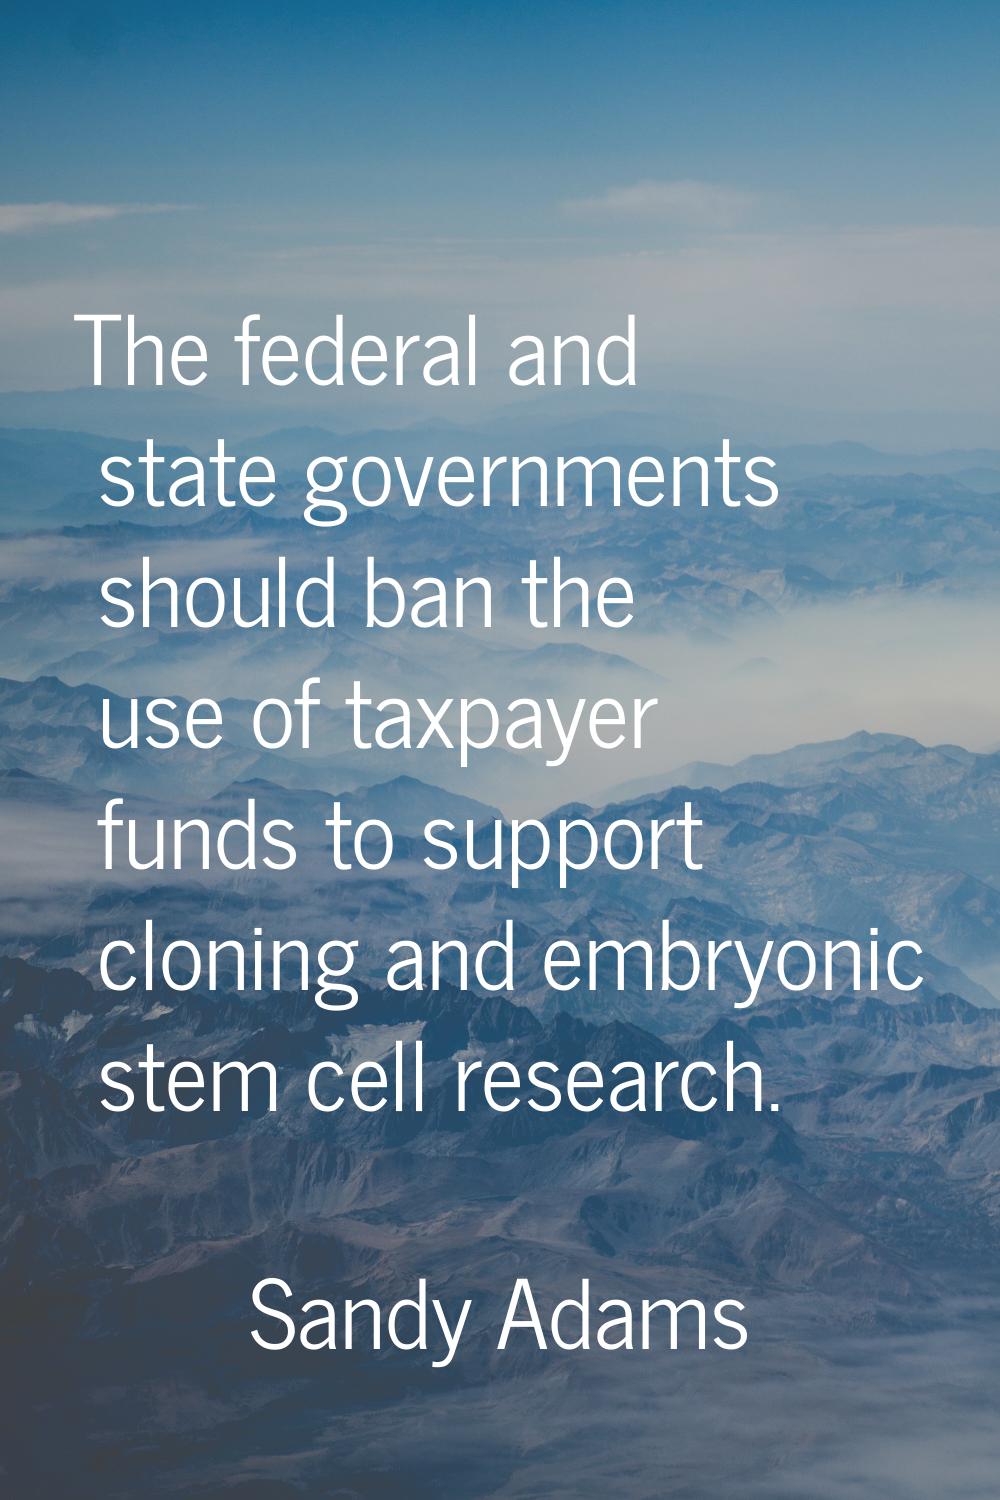 The federal and state governments should ban the use of taxpayer funds to support cloning and embry